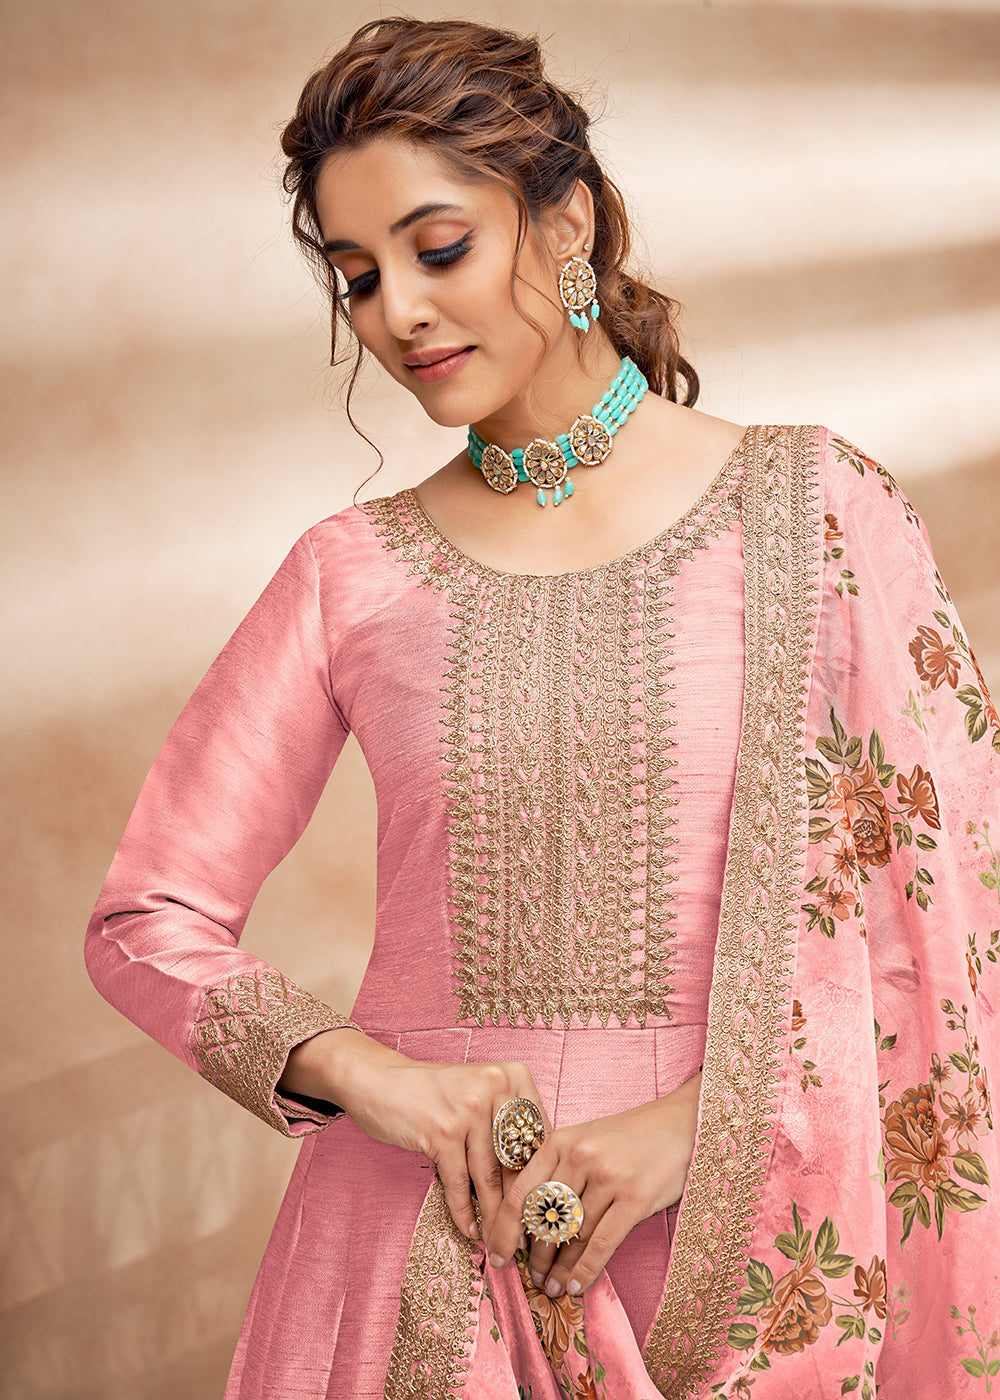 Buy Now Pretty Pink Art Silk Embellished Wedding & Party Anarkali Dress Online in Canada at Empress Clothing. 